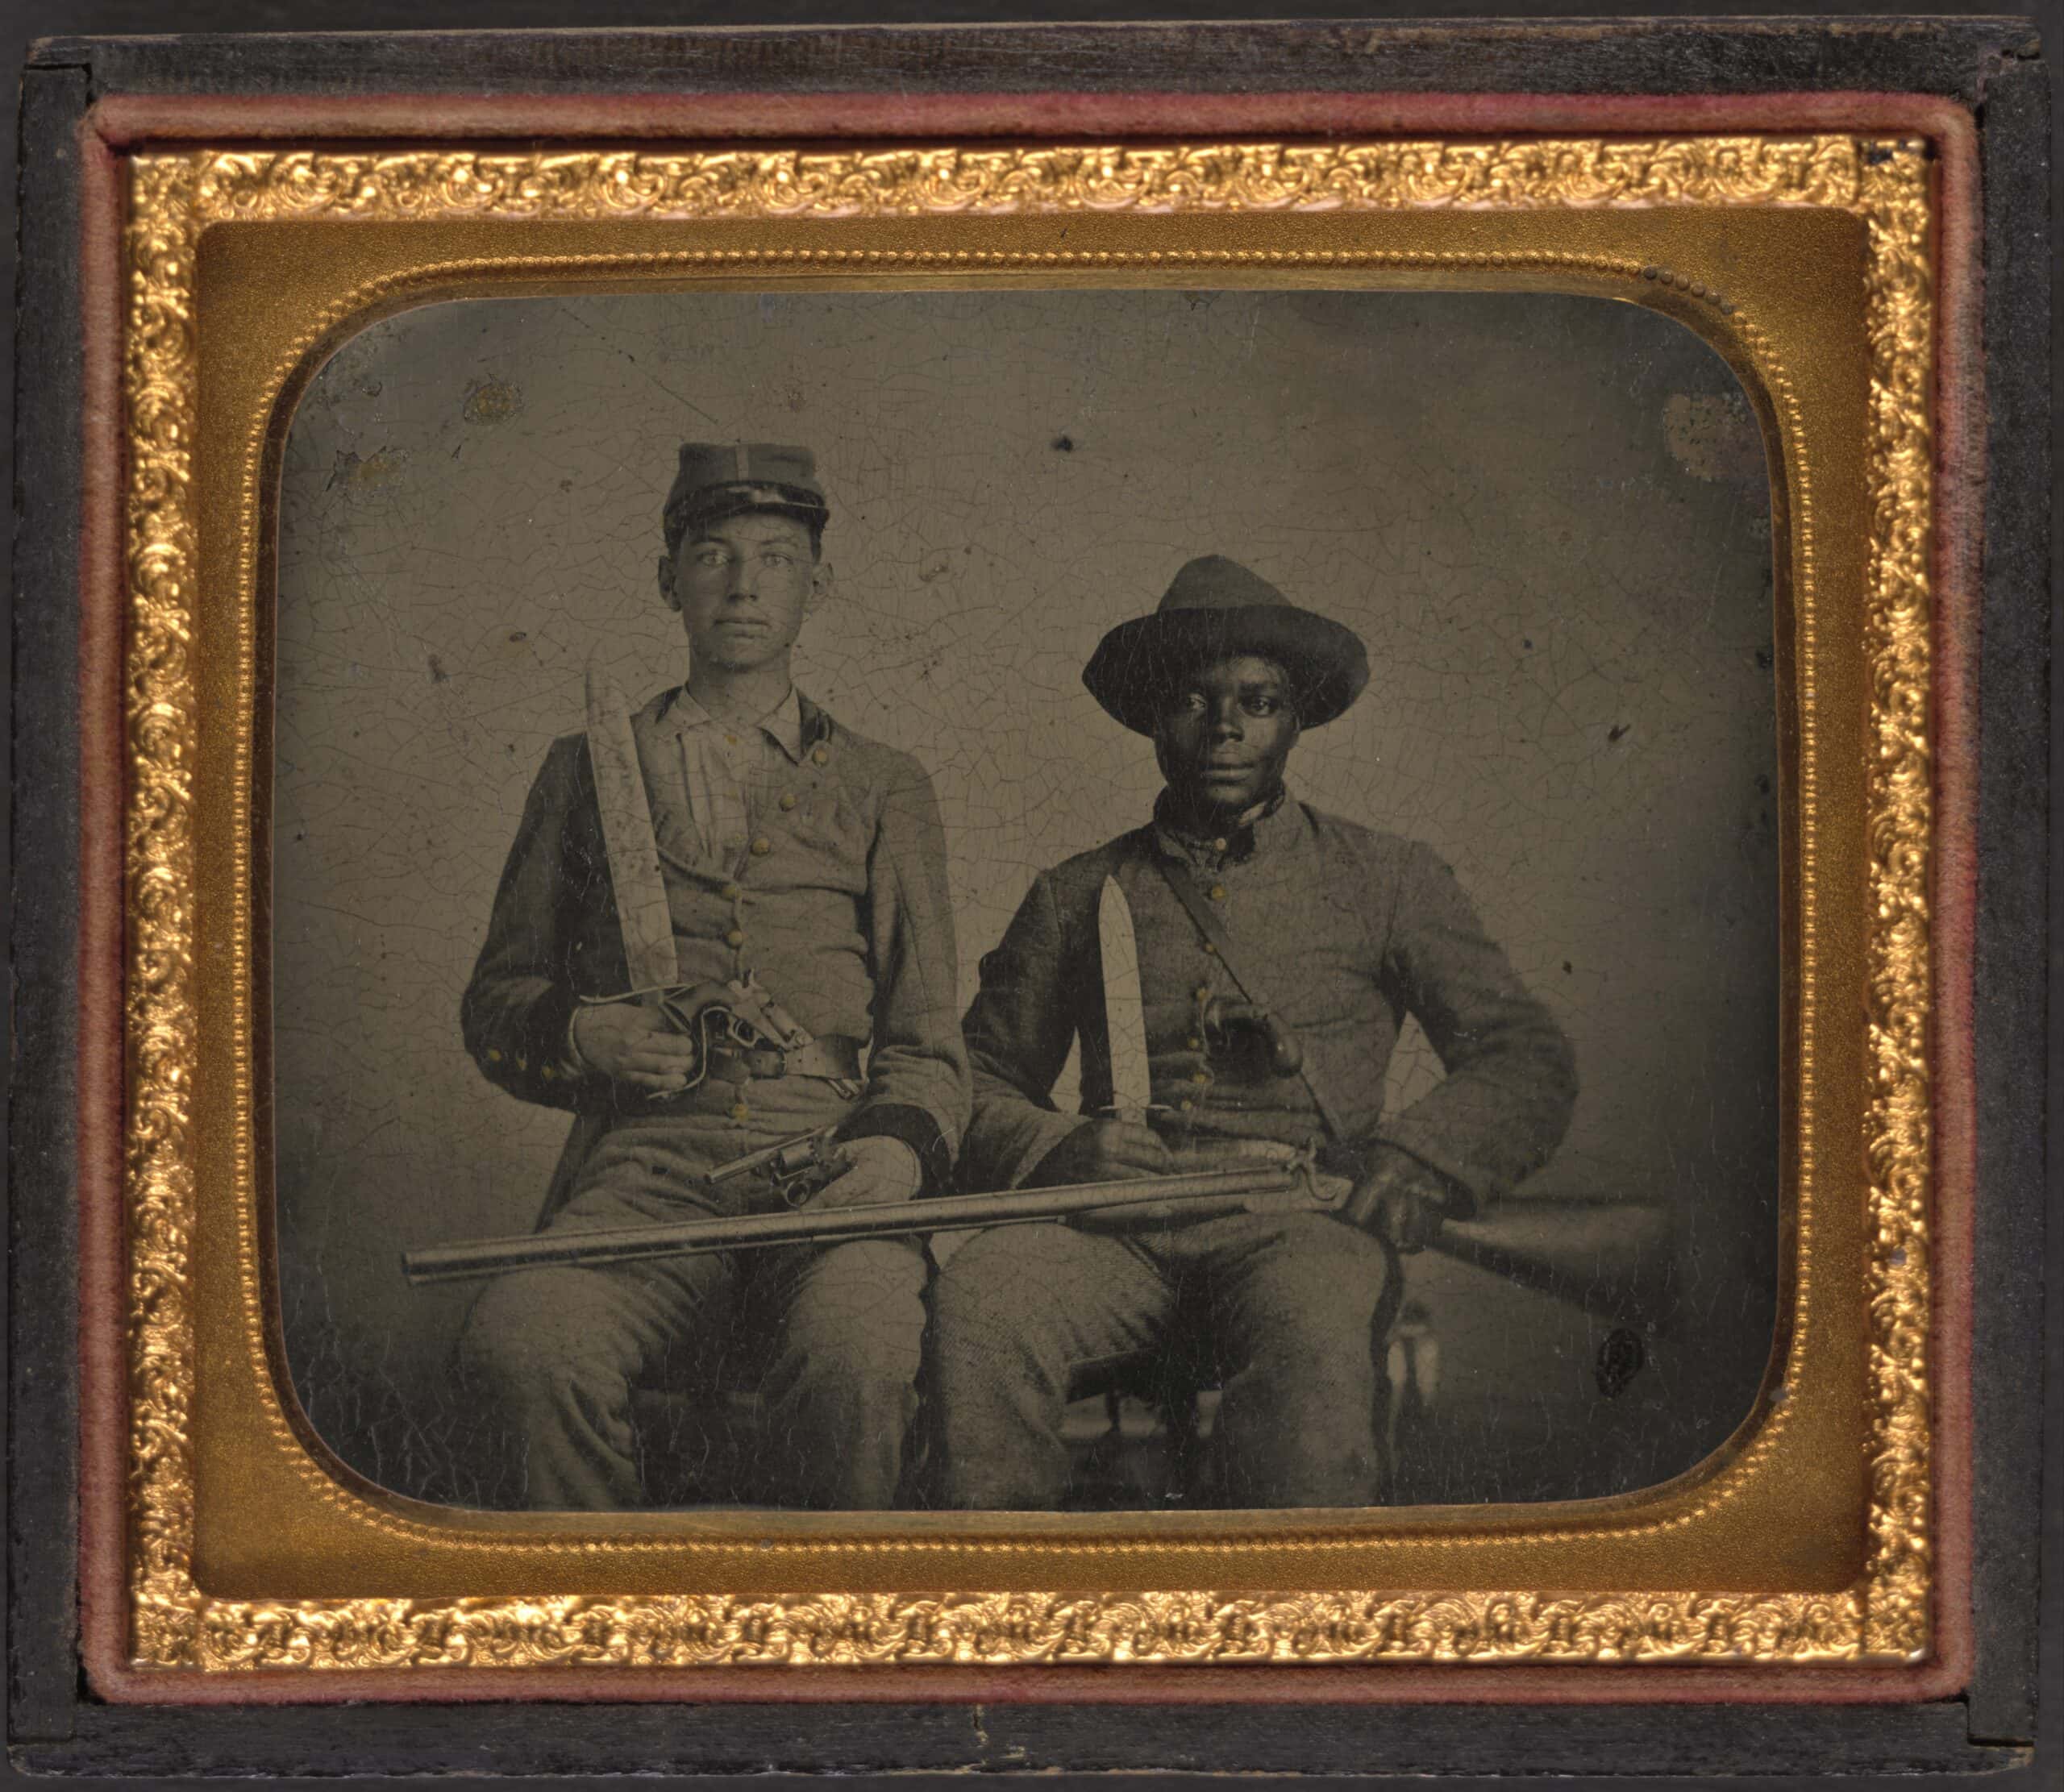 Sgt. A.M. Chandler of the 44th Mississippi Infantry Regiment and Silas Chandler, family slave